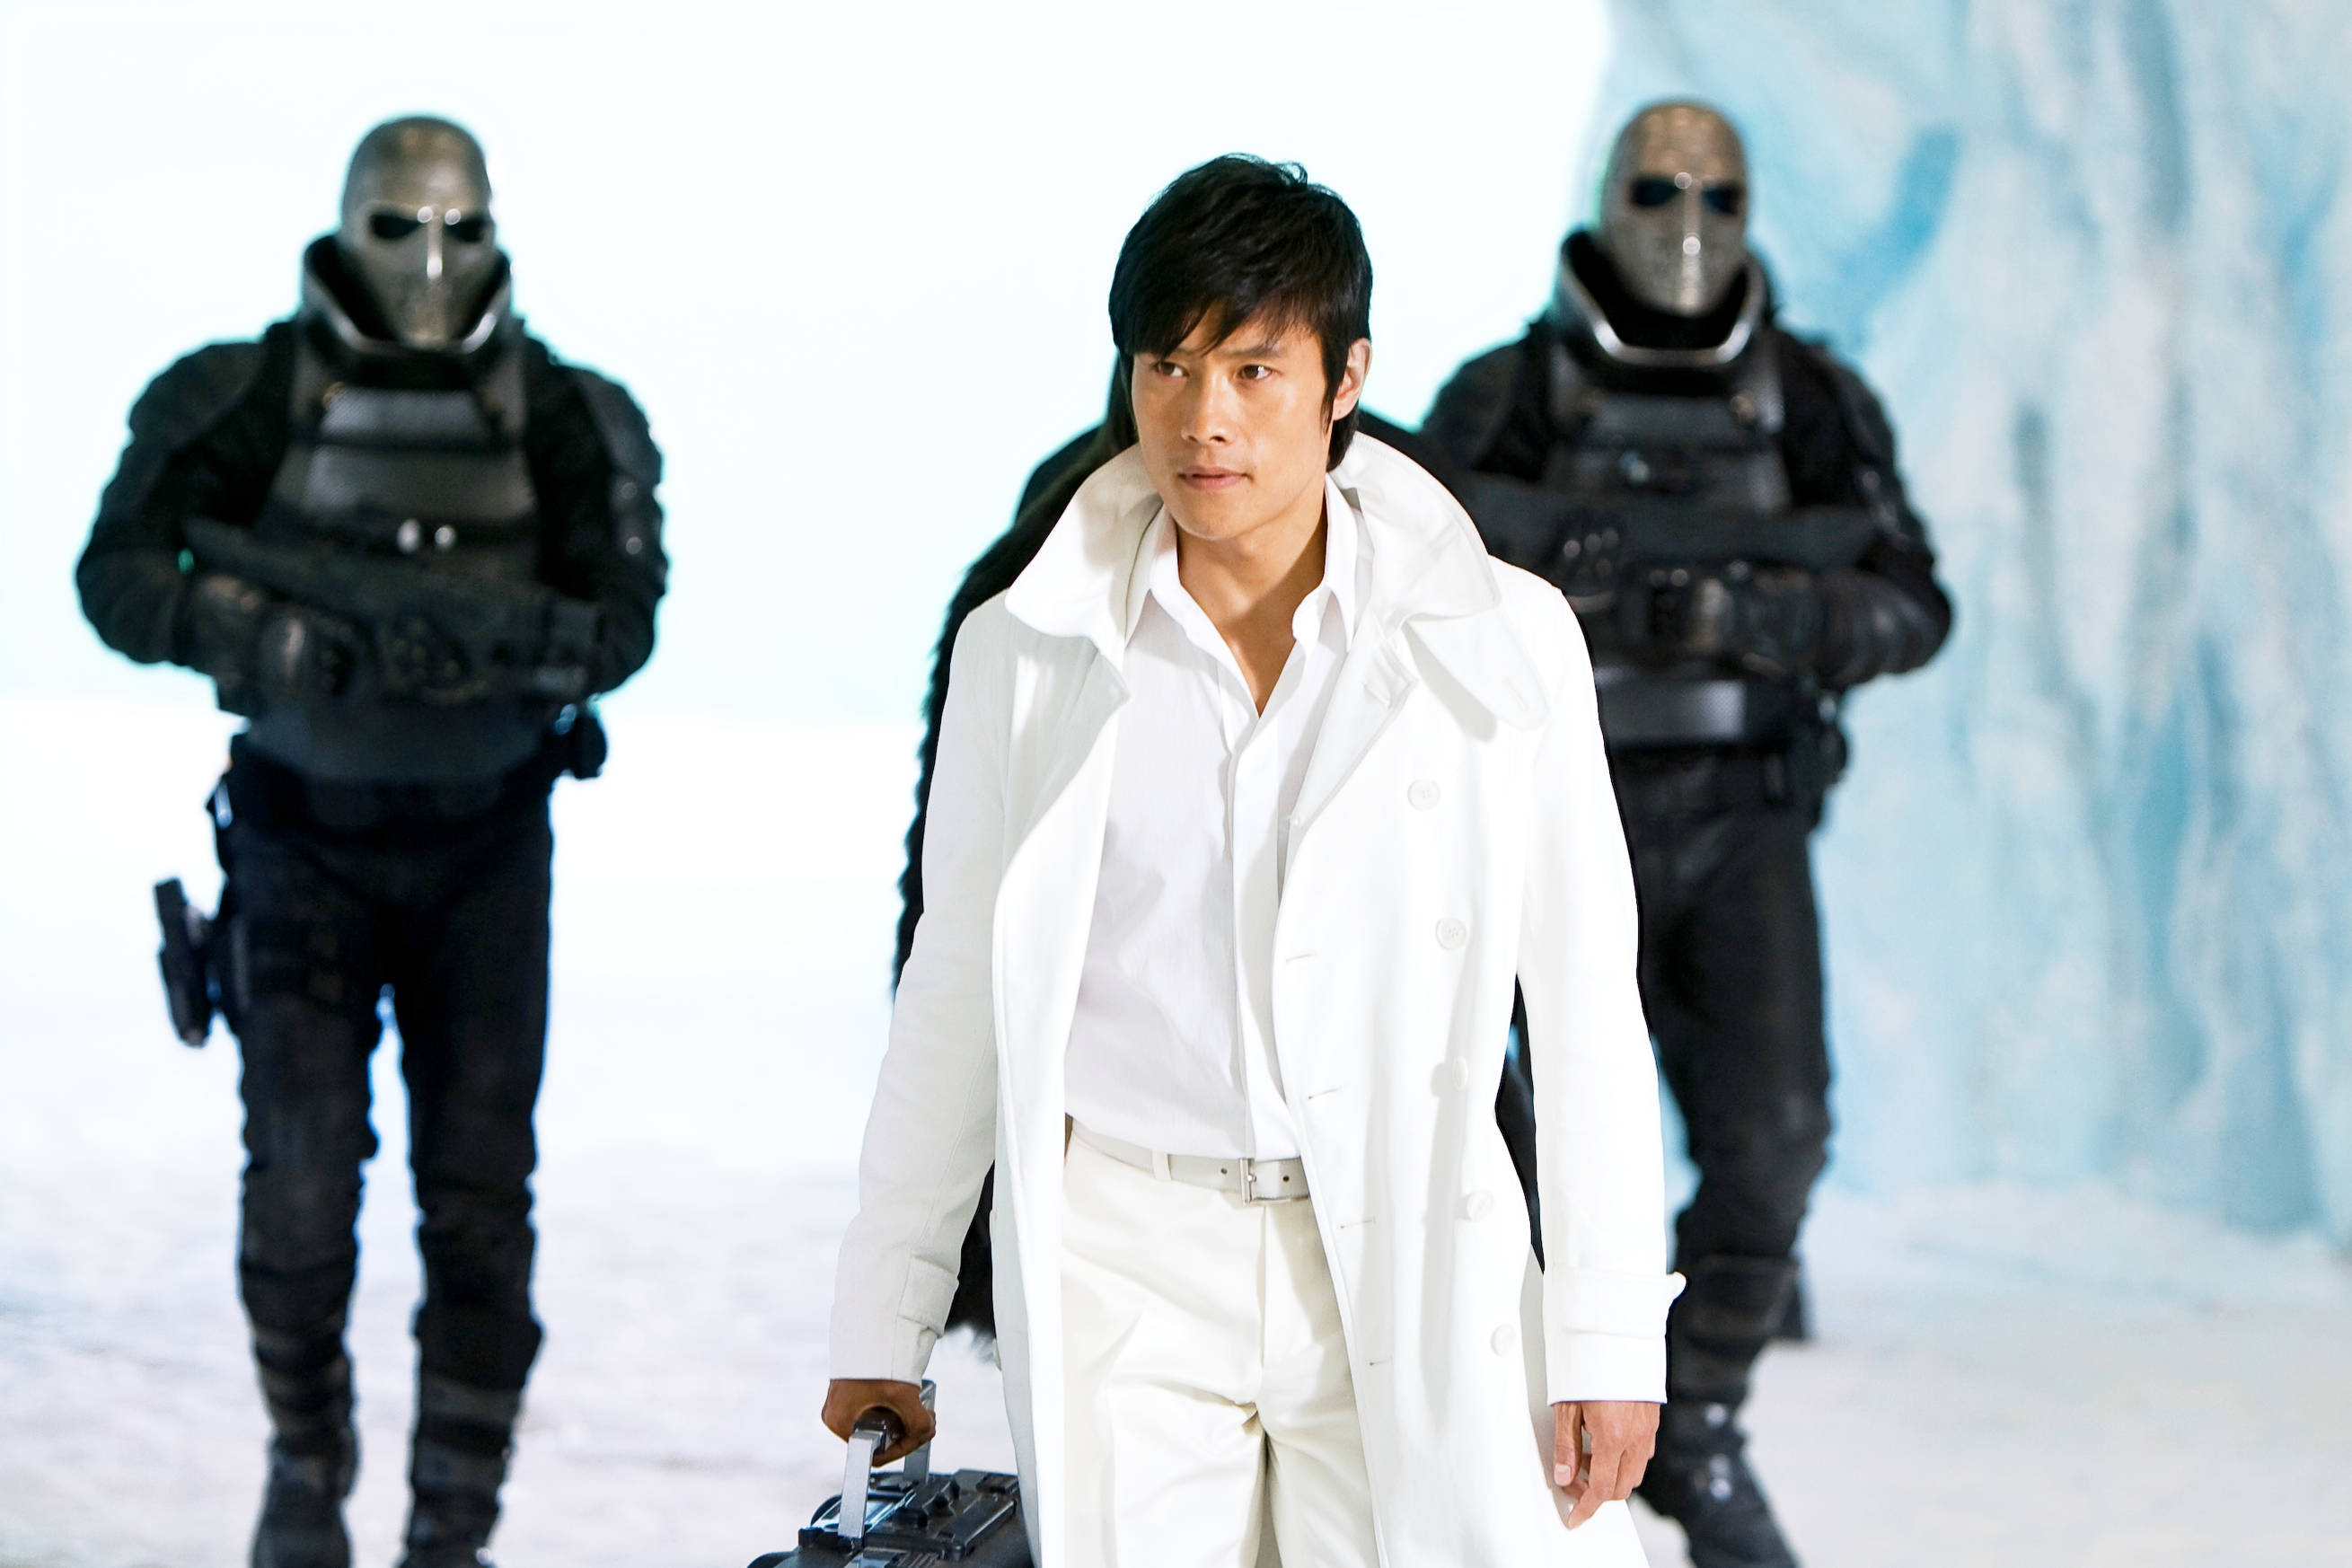 Lee Byung-hun stars as Storm Shadow in Paramount Pictures' G.I. Joe: Rise of Cobra (2009)